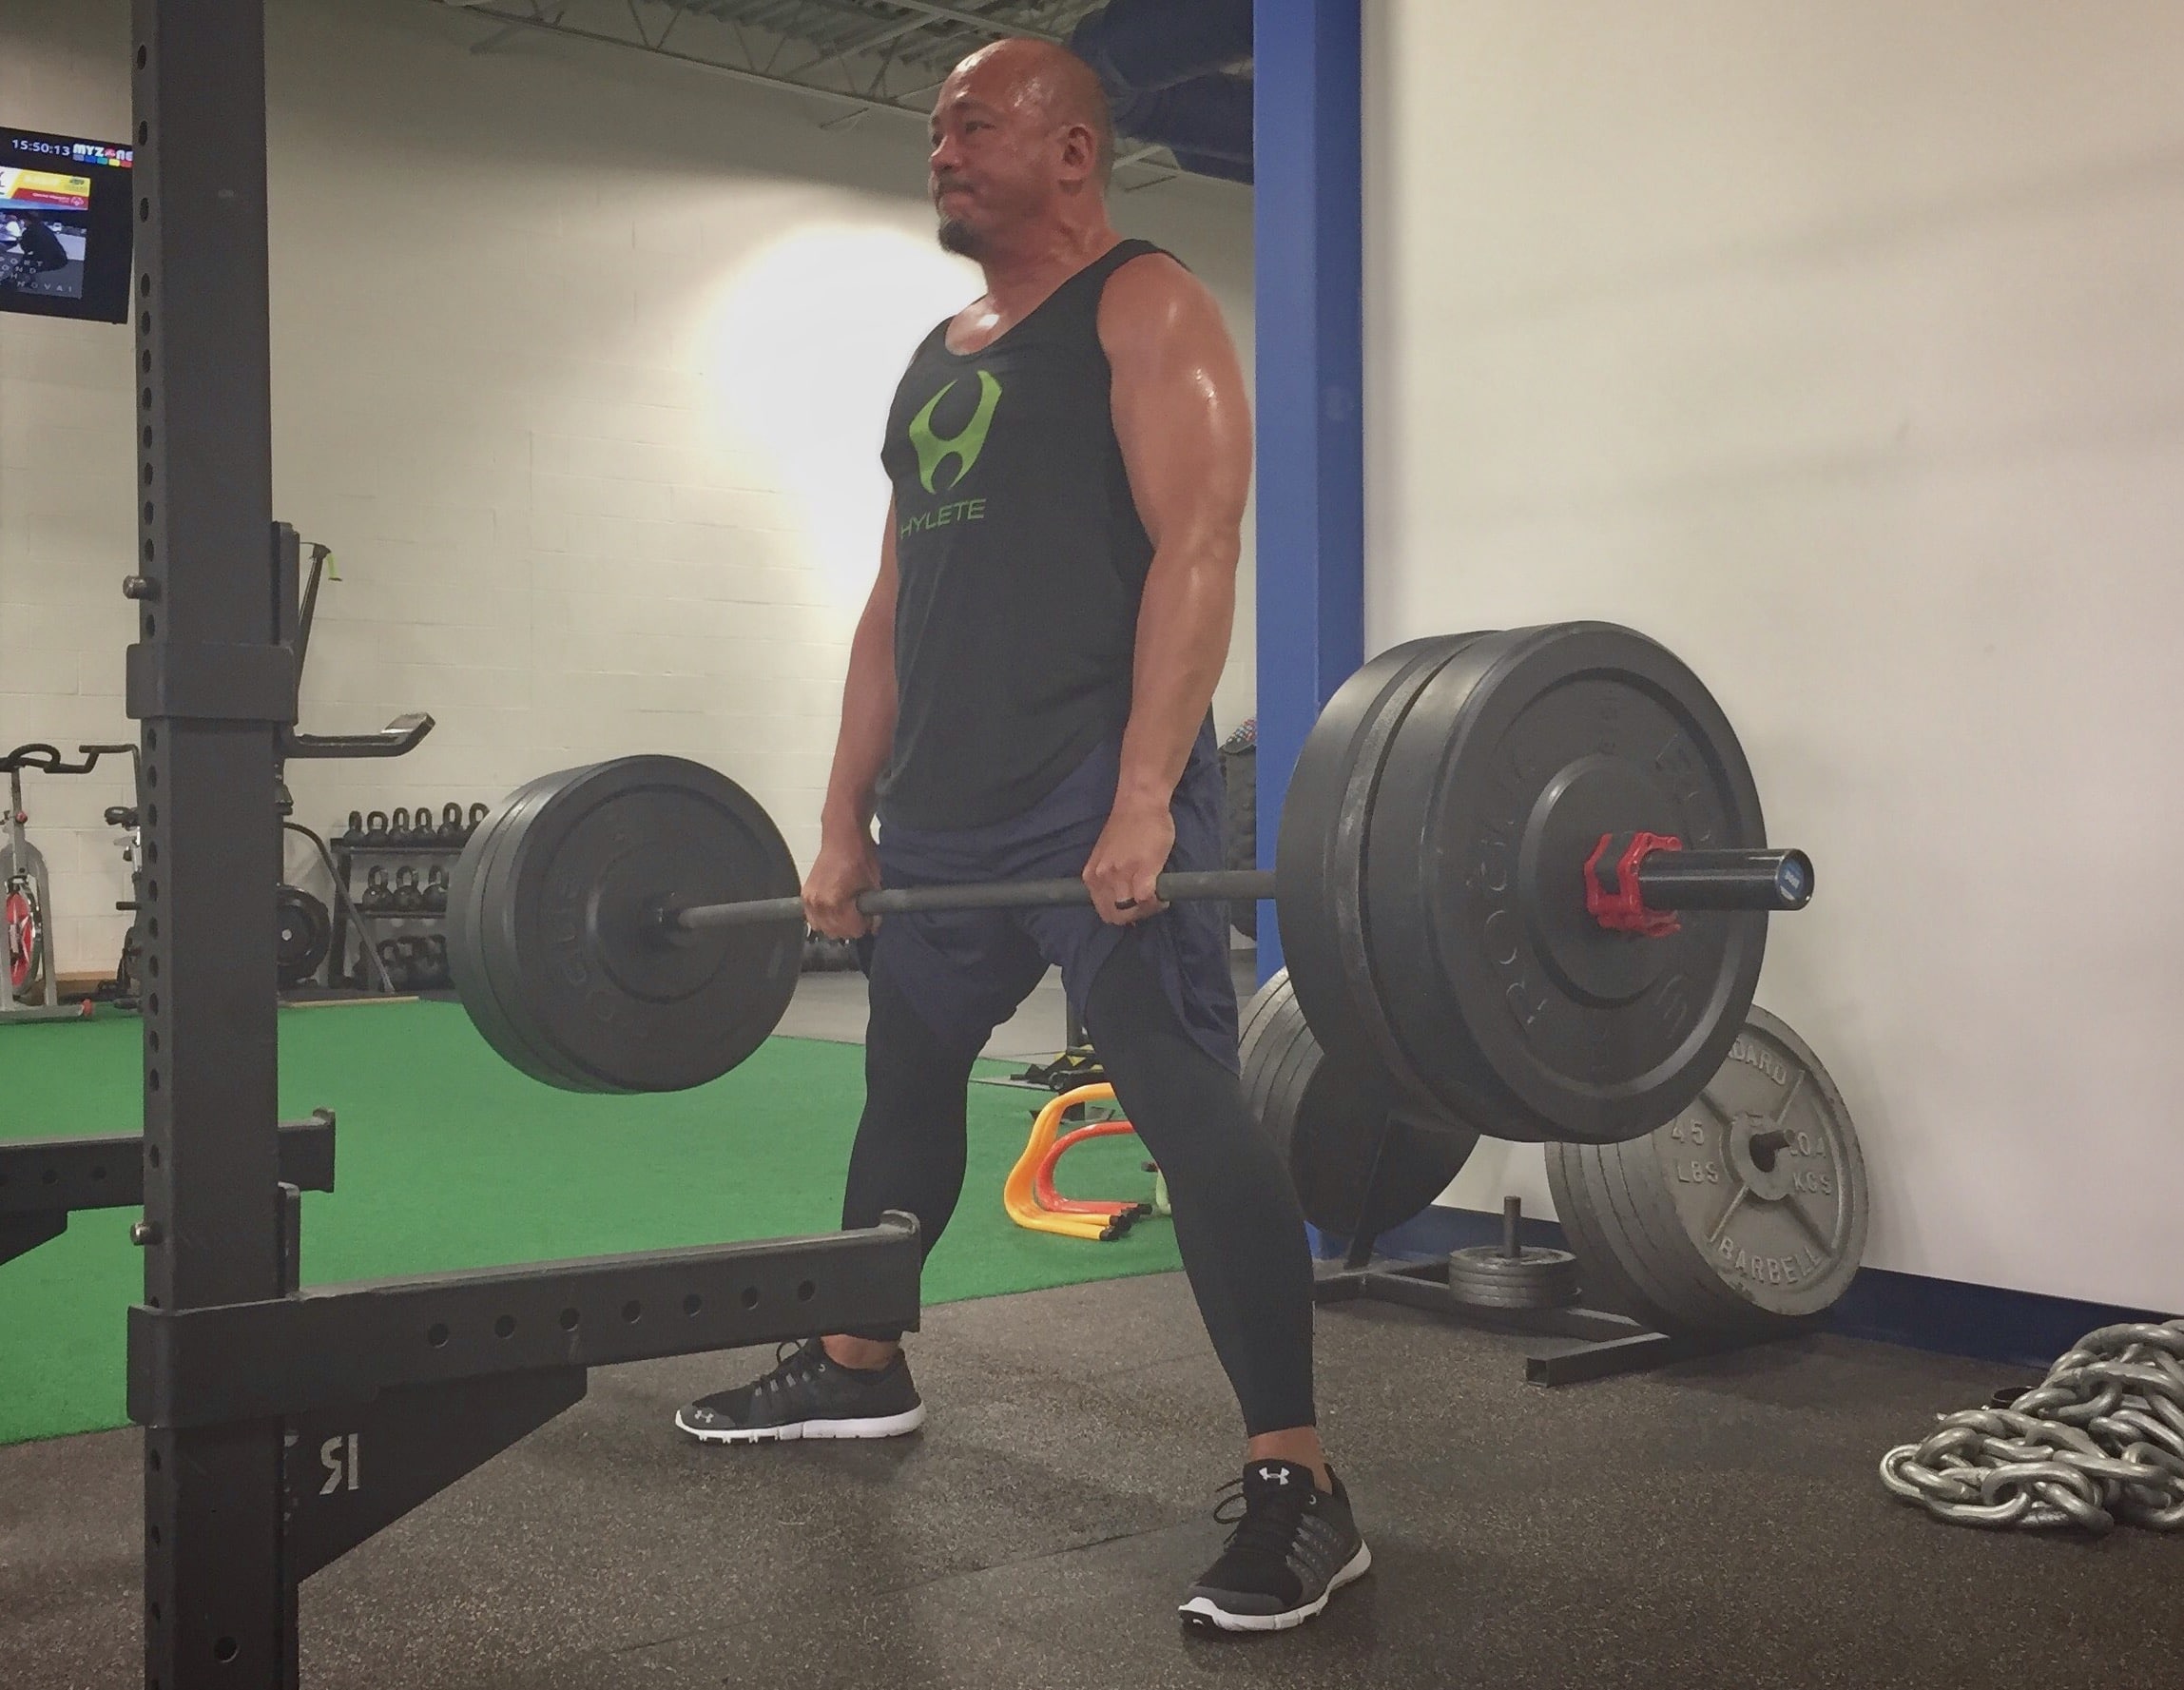 rob deadlifting at bsp nova located at 21620 ridgetop circle in sterling, va while training with a full-body routine